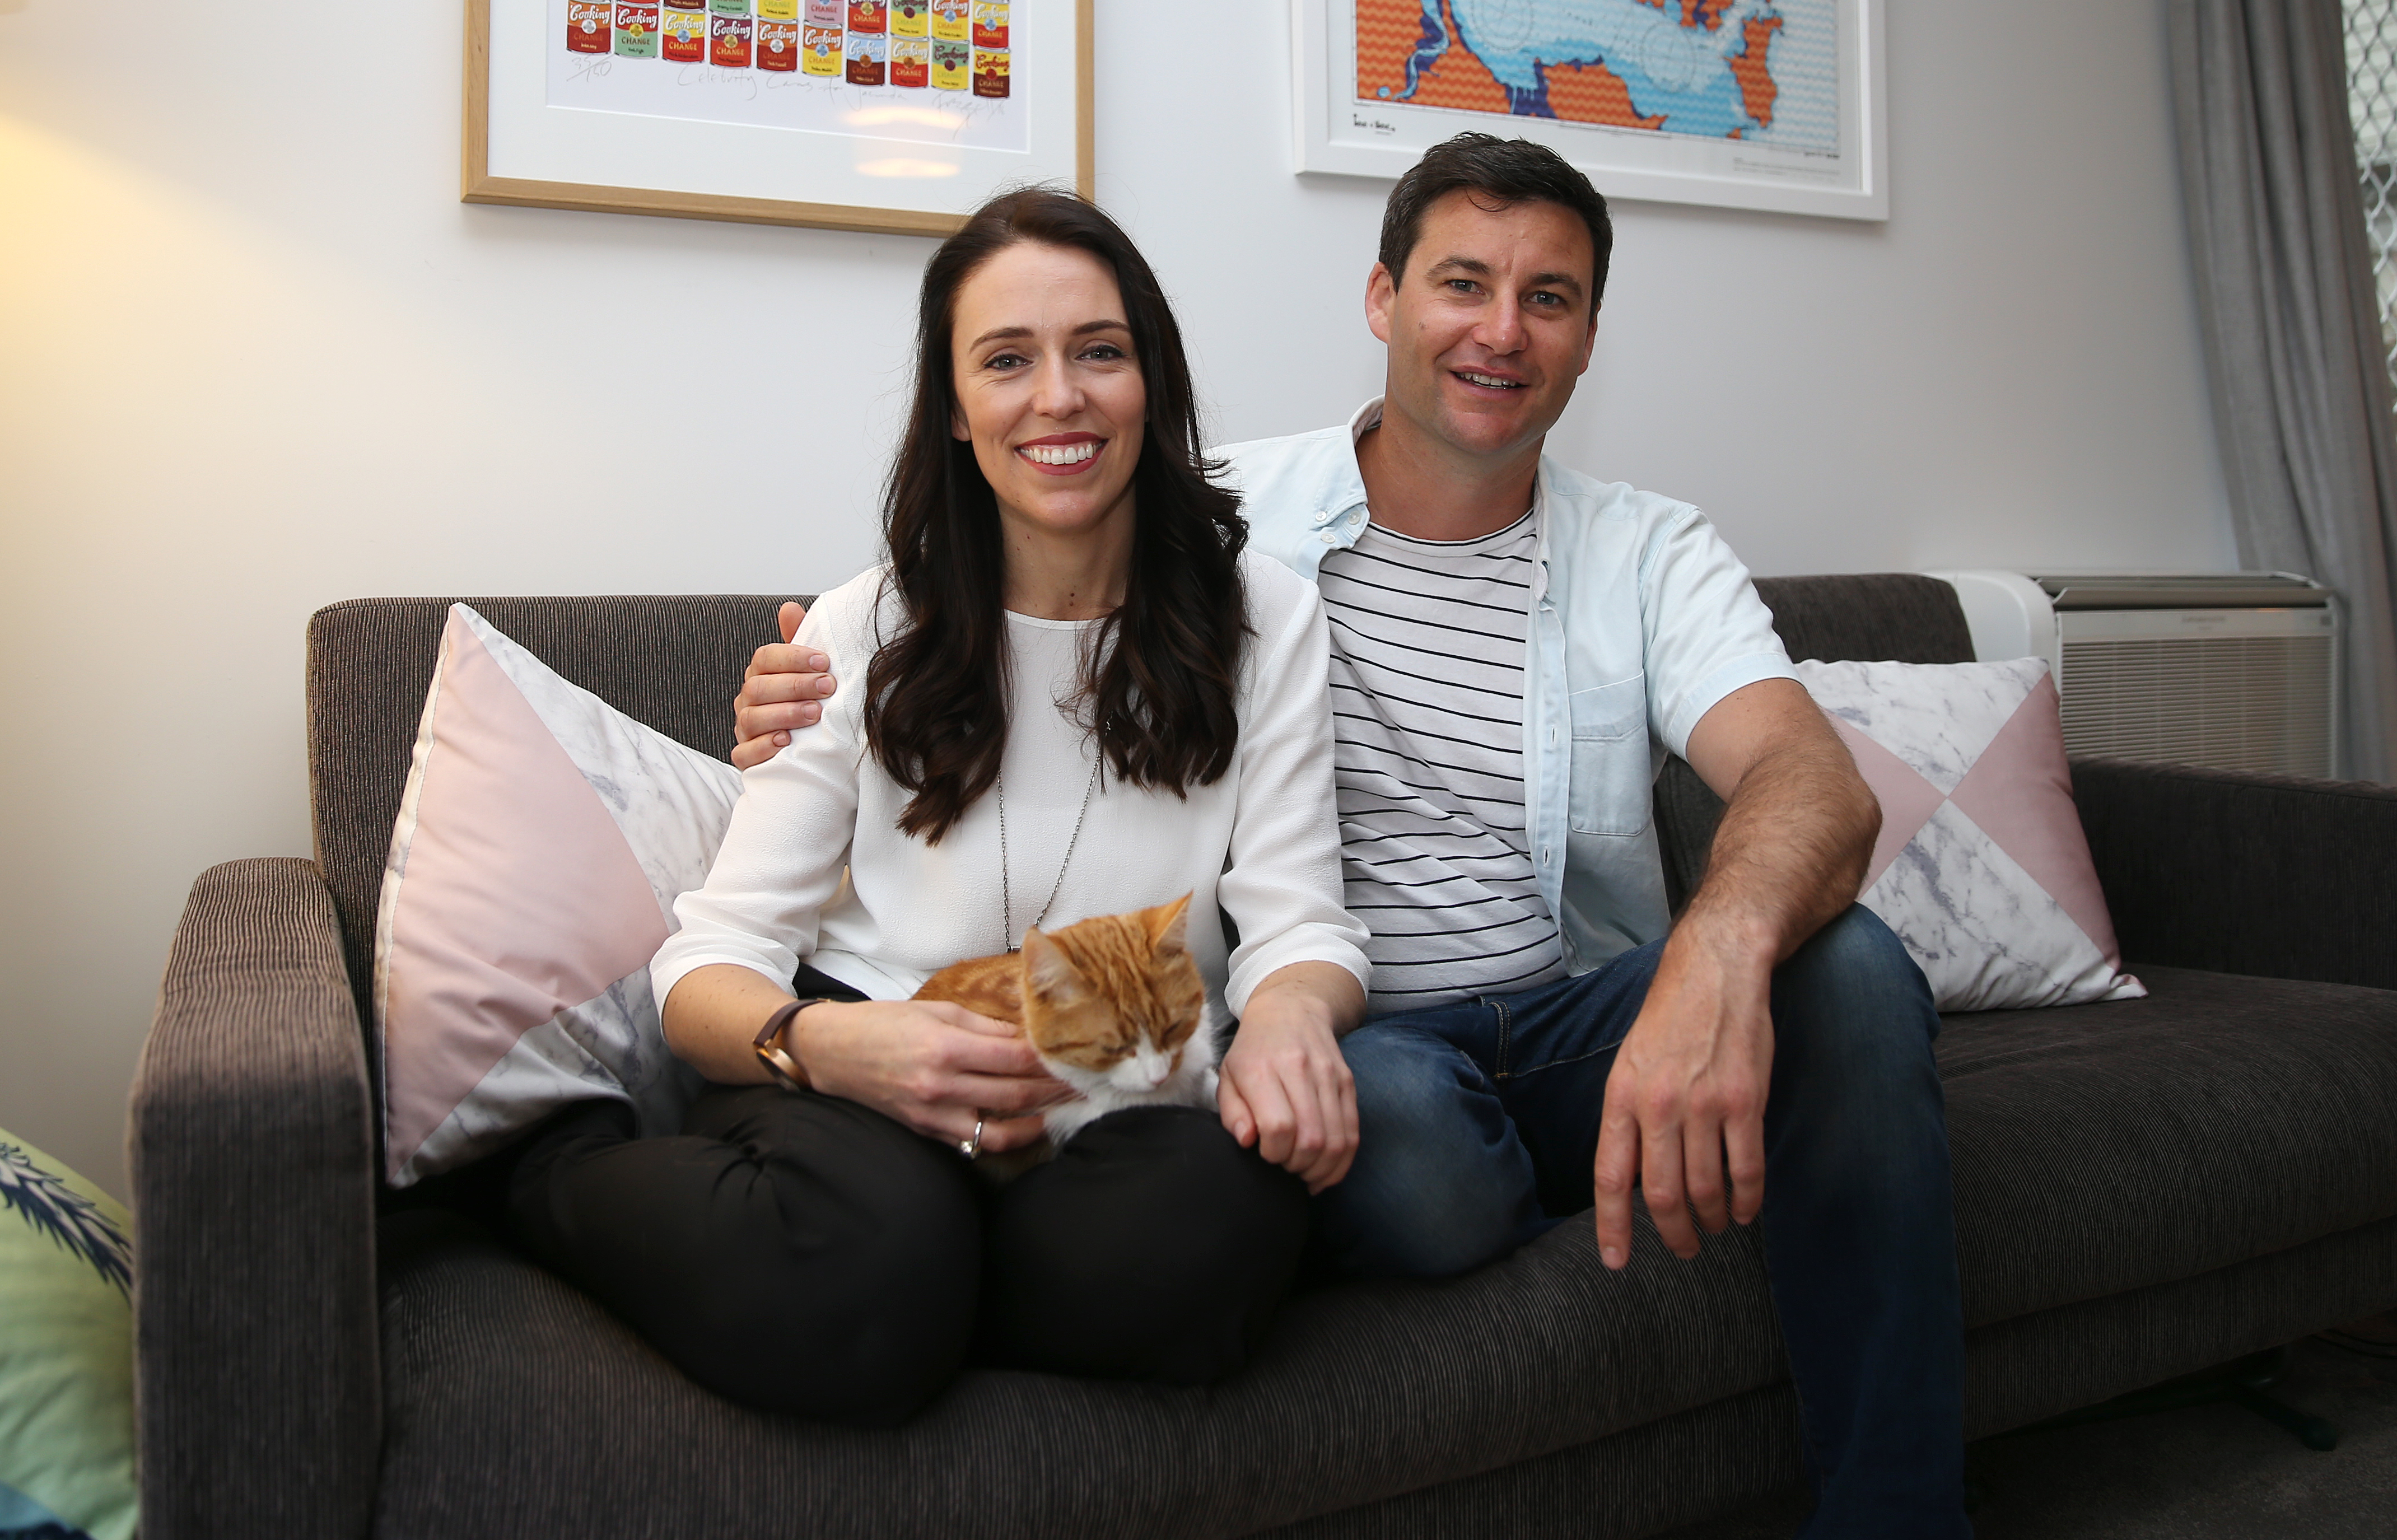 Labour Party leader Jacinda Ardern with partner Clarke Gayford at home in Pt Chevalier, Auckland.. 14 August 2017 New Zealand Herald Photograph by Doug Sherring.